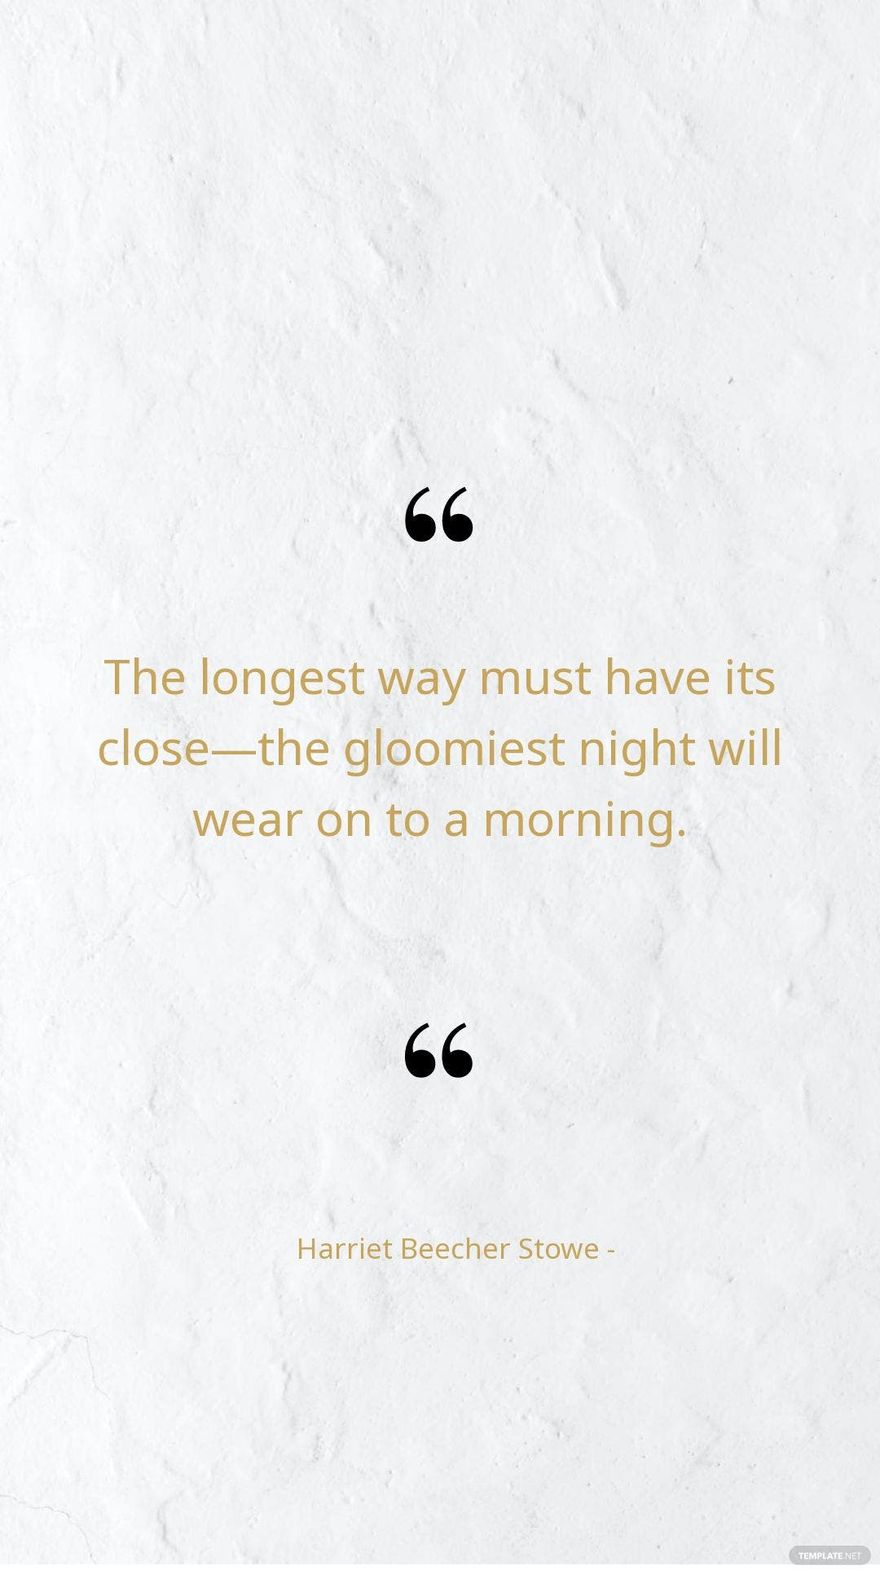 Harriet Beecher Stowe - The longest way must have its close—the gloomiest night will wear on to a morning.